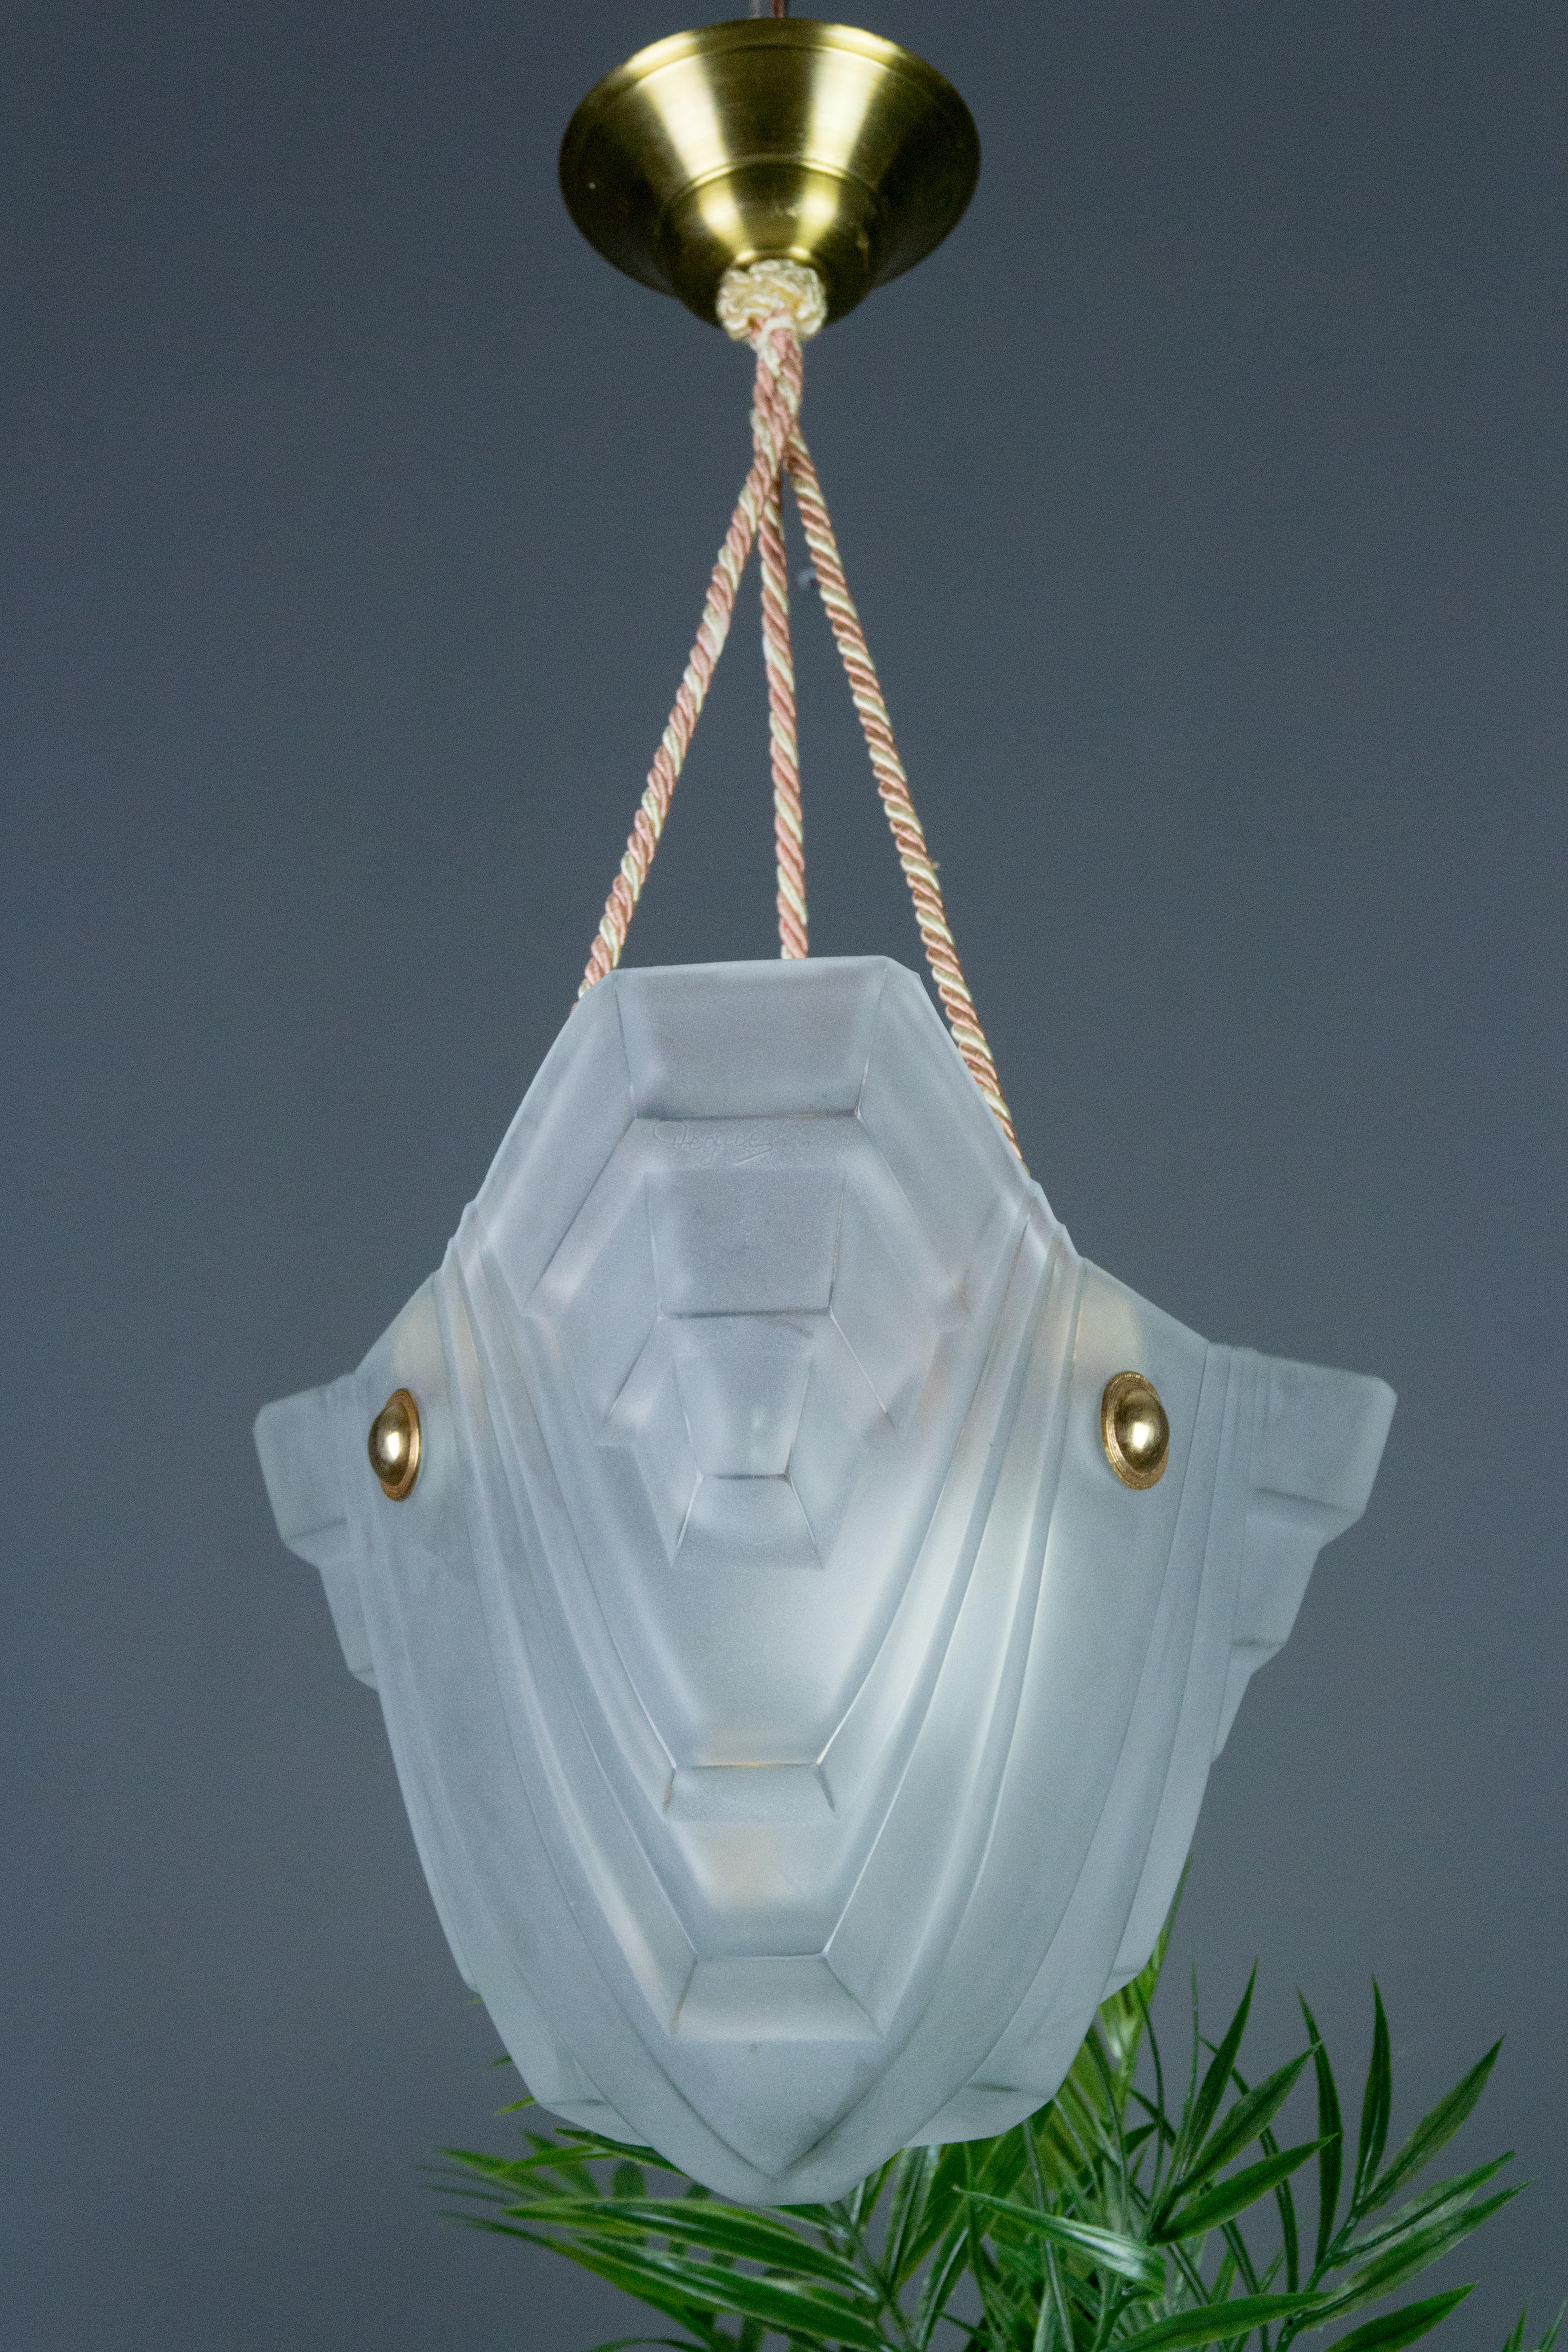 This beautiful French Art Deco pendant chandelier features an unusual shape of a white frosted glass shade, made and marked by Degué.
Held by three cords with a brass canopy. One socket for E27 (E26) size light bulb.
Dimensions: height 50 cm /